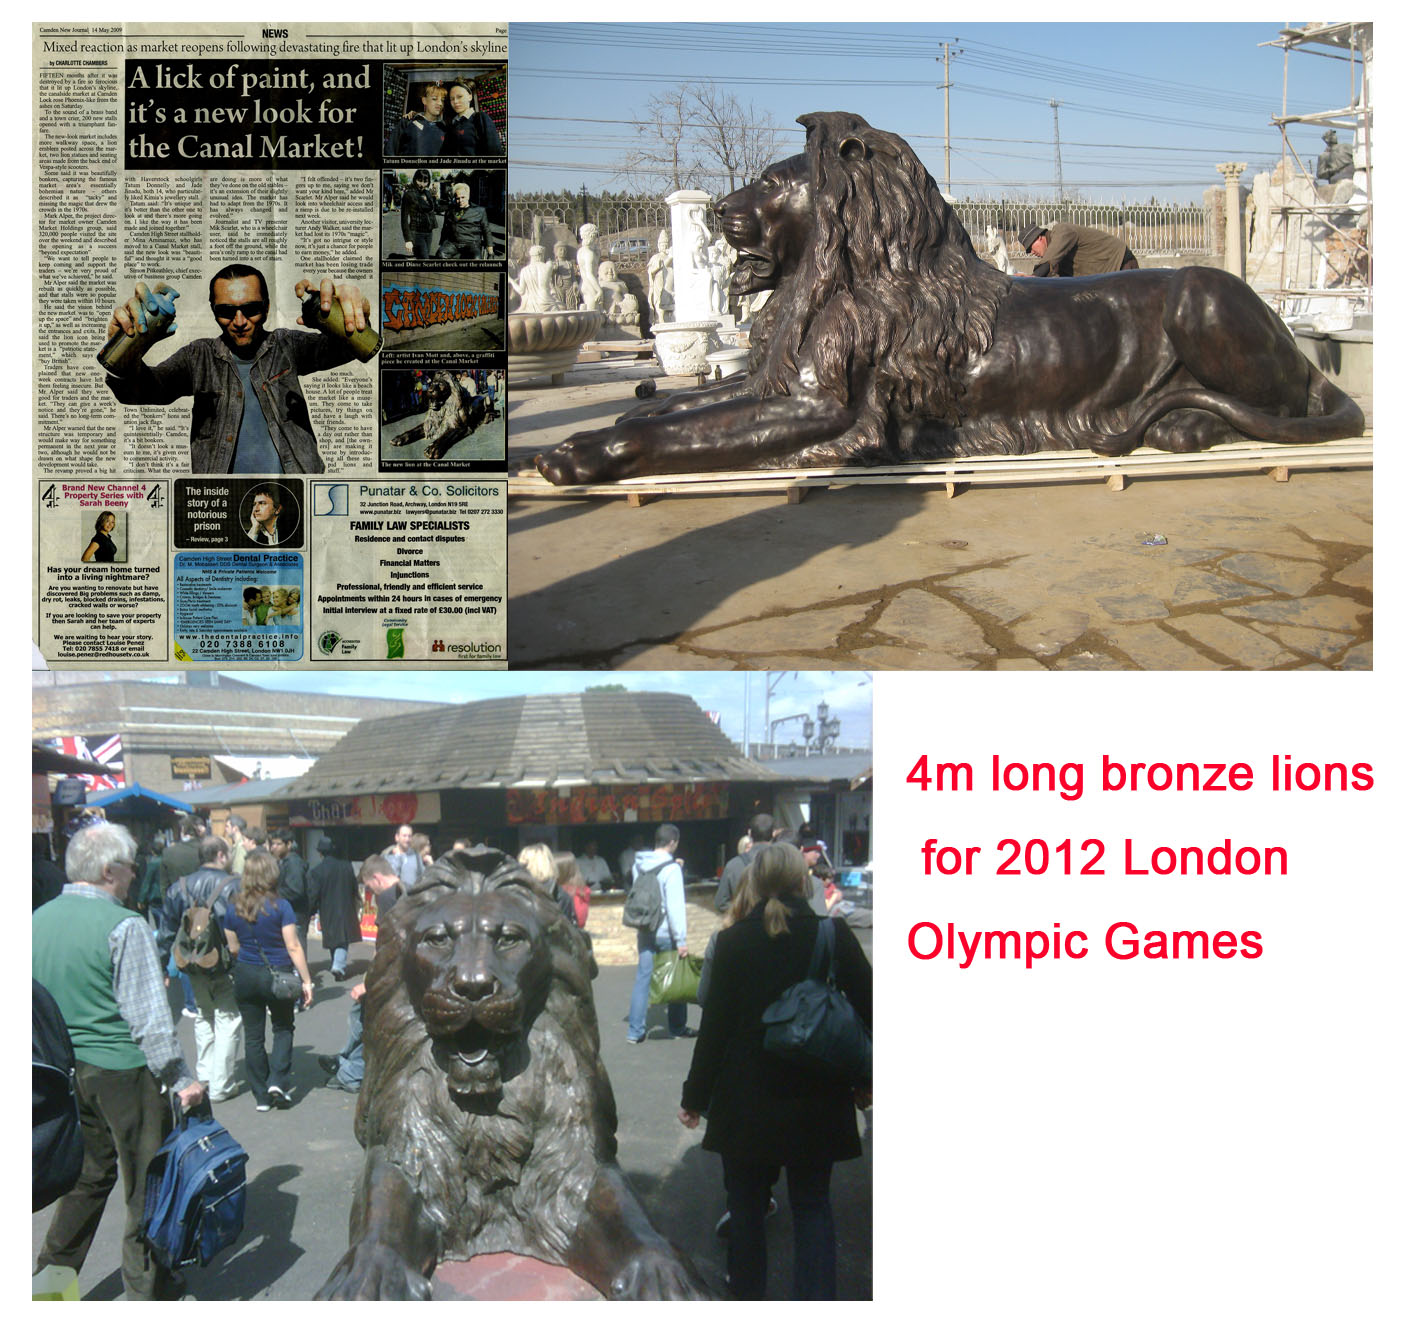 bronze lion for Olympic Games